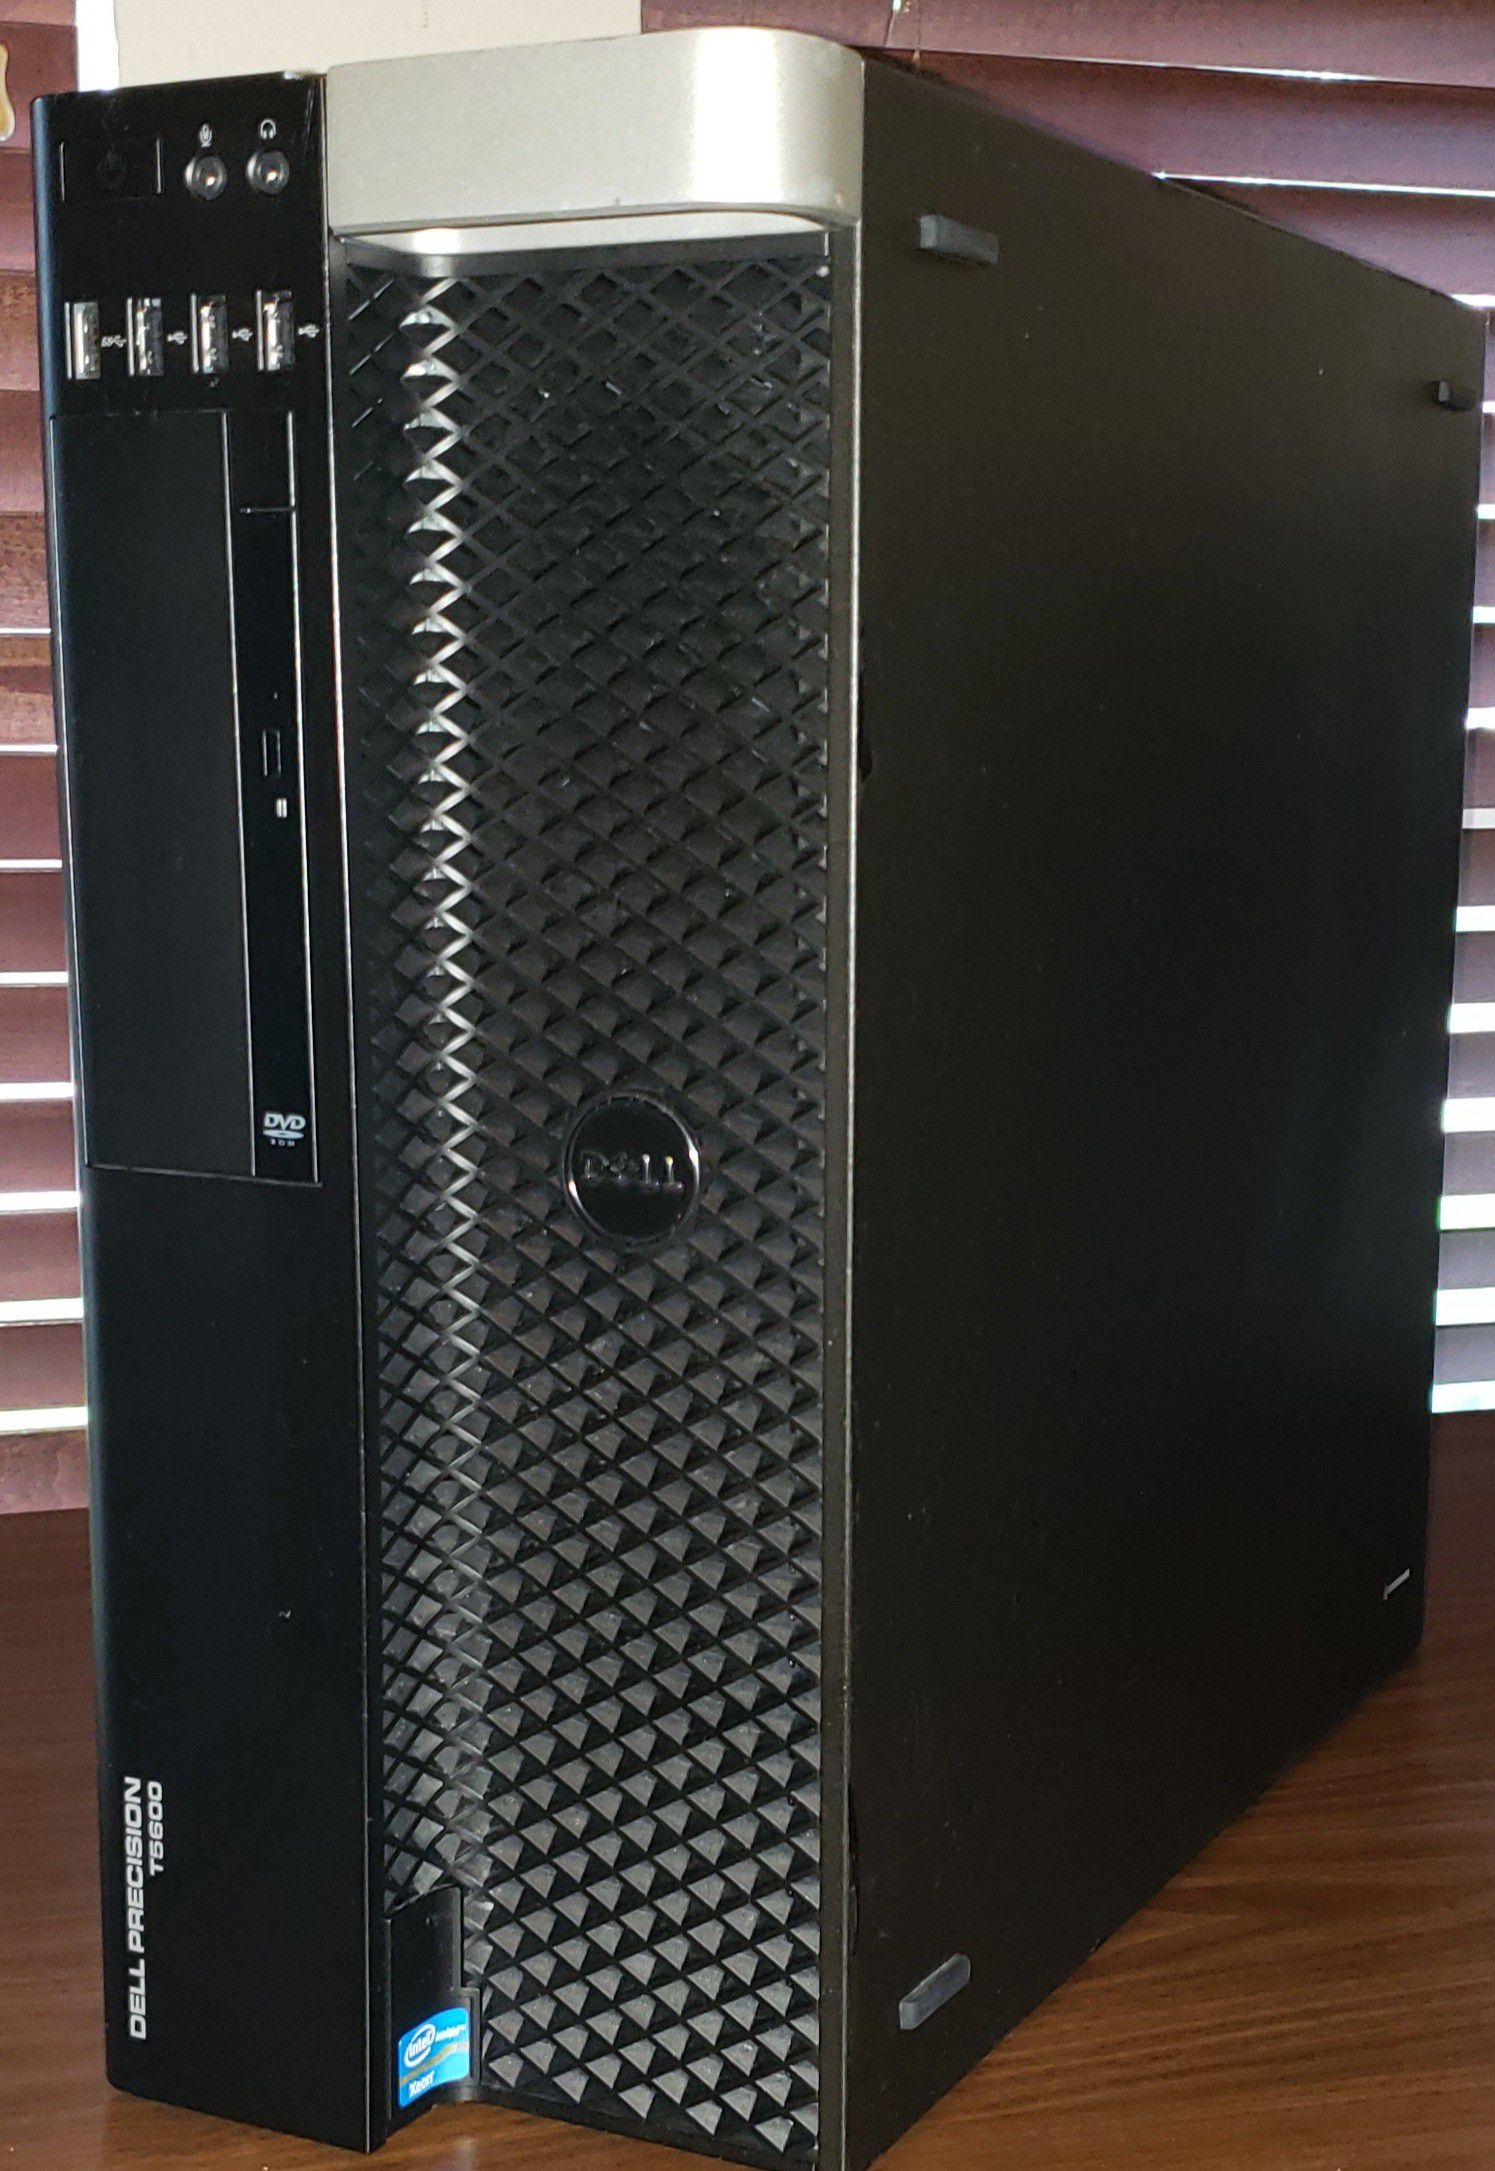 Gaming or Engineering computer - Dell Precision T5600 - Xeon CPU - 16GB memory - 180GB SSD & 1TB HDD